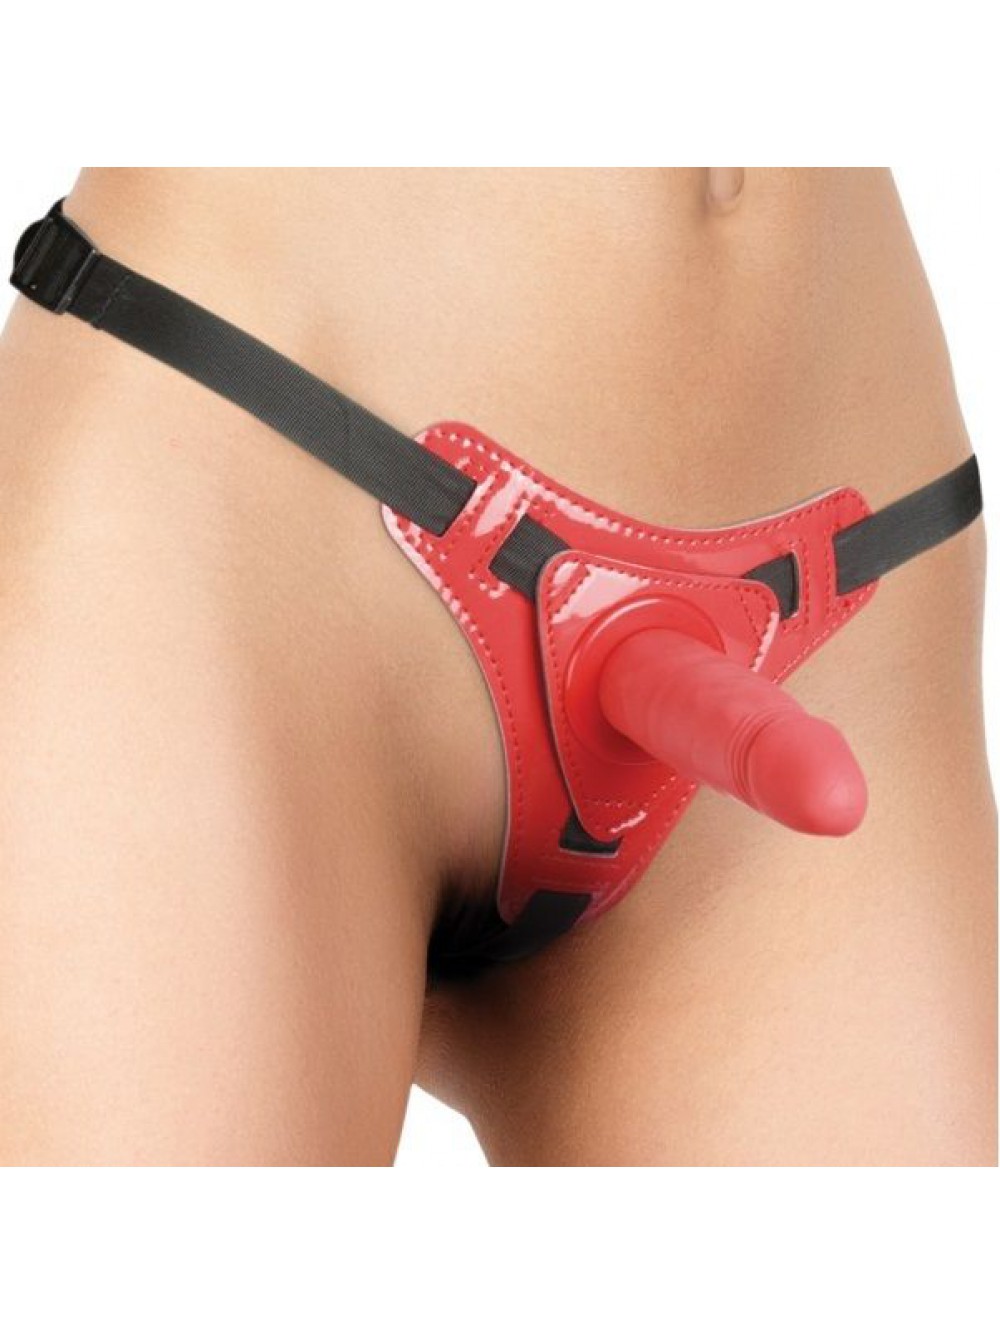 BO-OUCH STRAP-ON RED 8714273950000